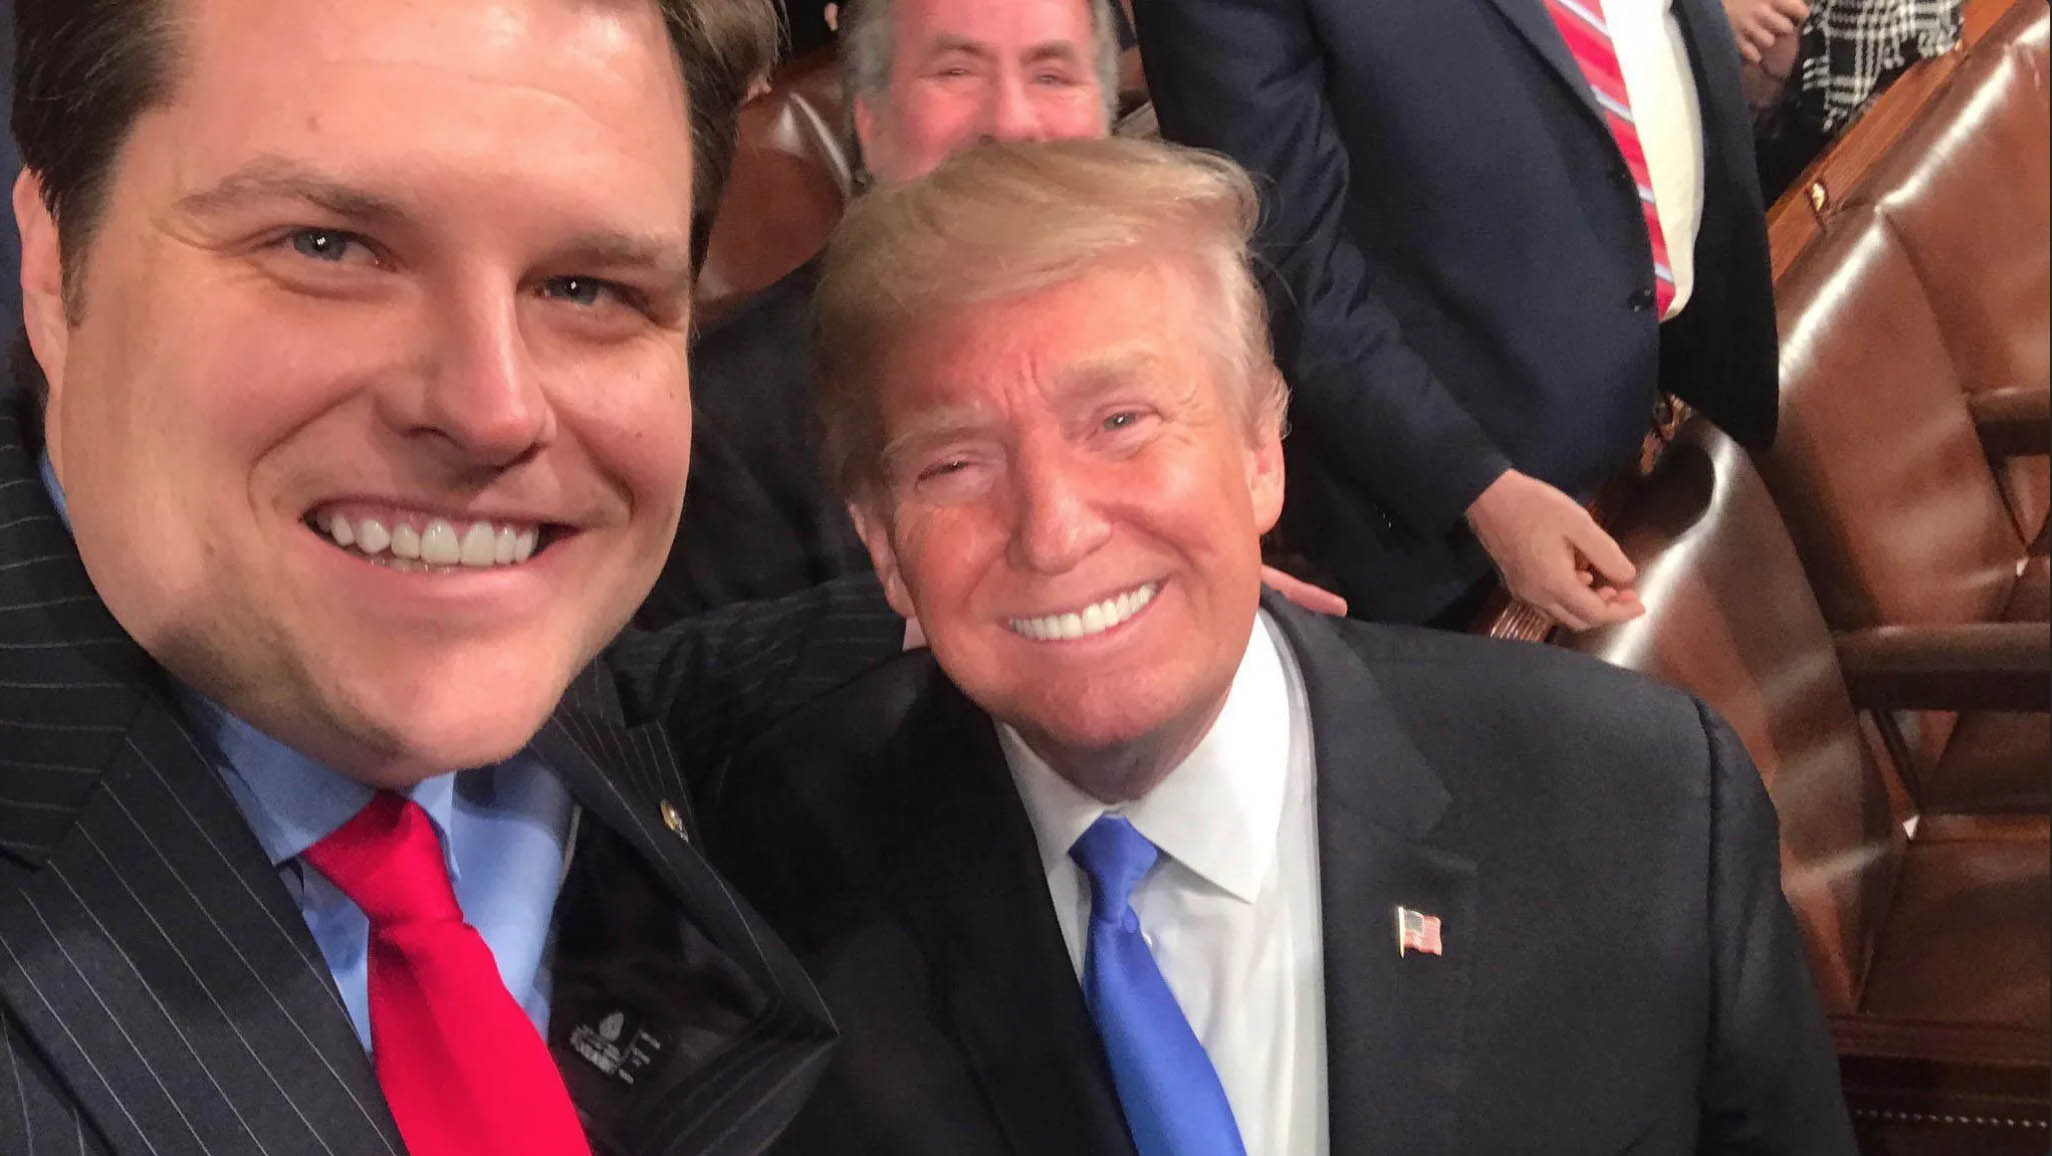 <p>Even before officially announcing in November 2022, Florida lawmaker Matt Gaetz has consistently shown support for Trump's potential return to politics. In an op-ed for the Daily Caller in November Gaetz wrote:</p><blockquote>There's so many more accomplishments left for us to achieve if we elect Donald Trump back to the White House.</blockquote><p>That's a clear signal as to where his vote lies.</p>